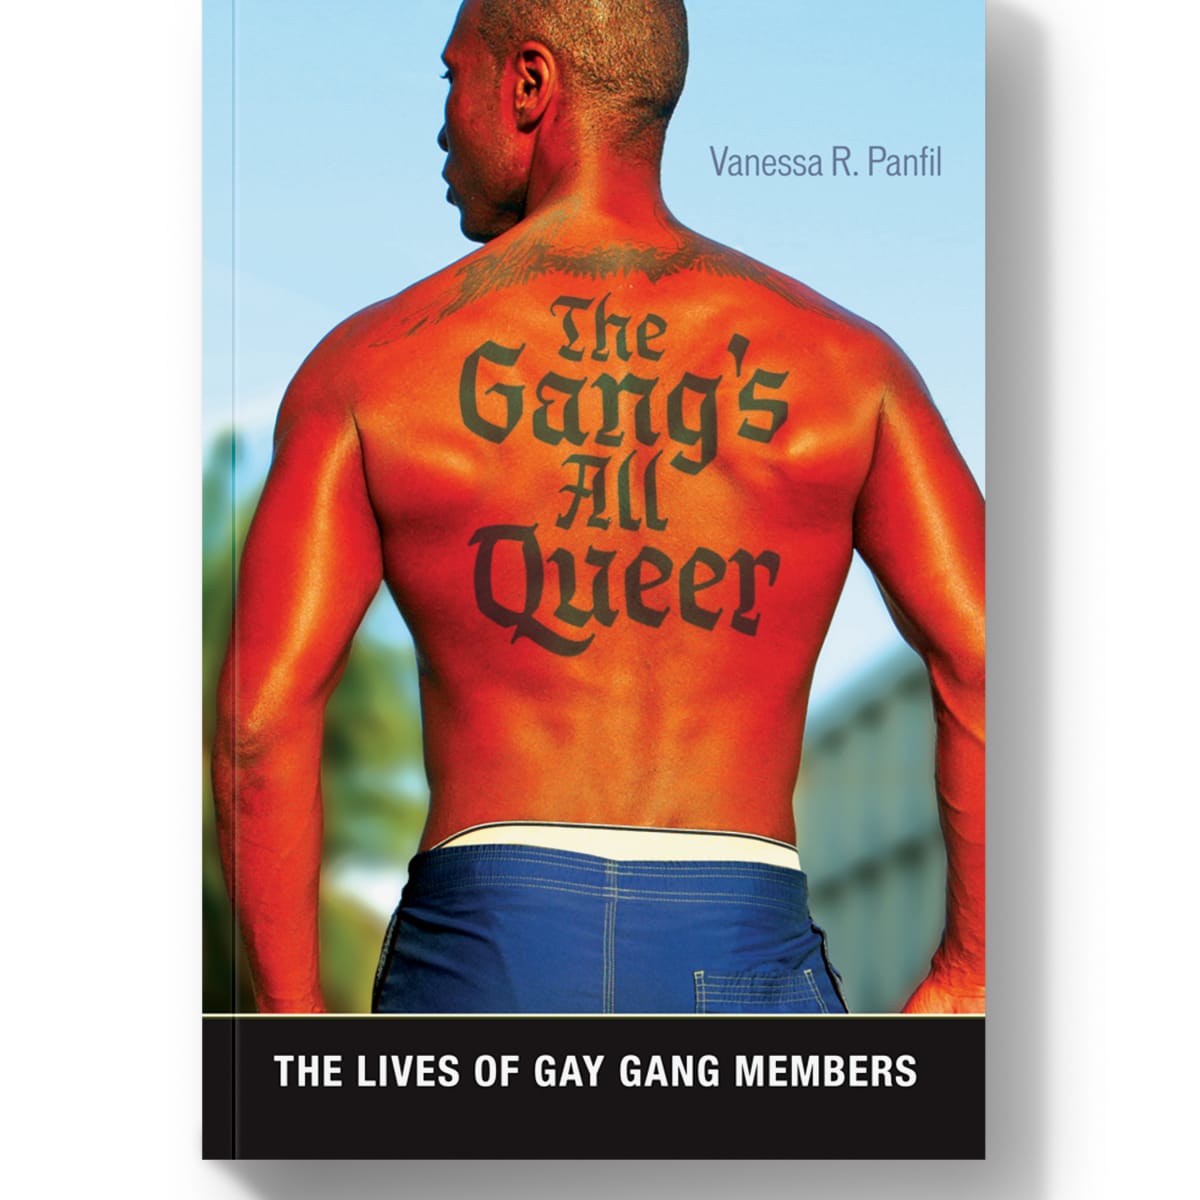 Gaygangster